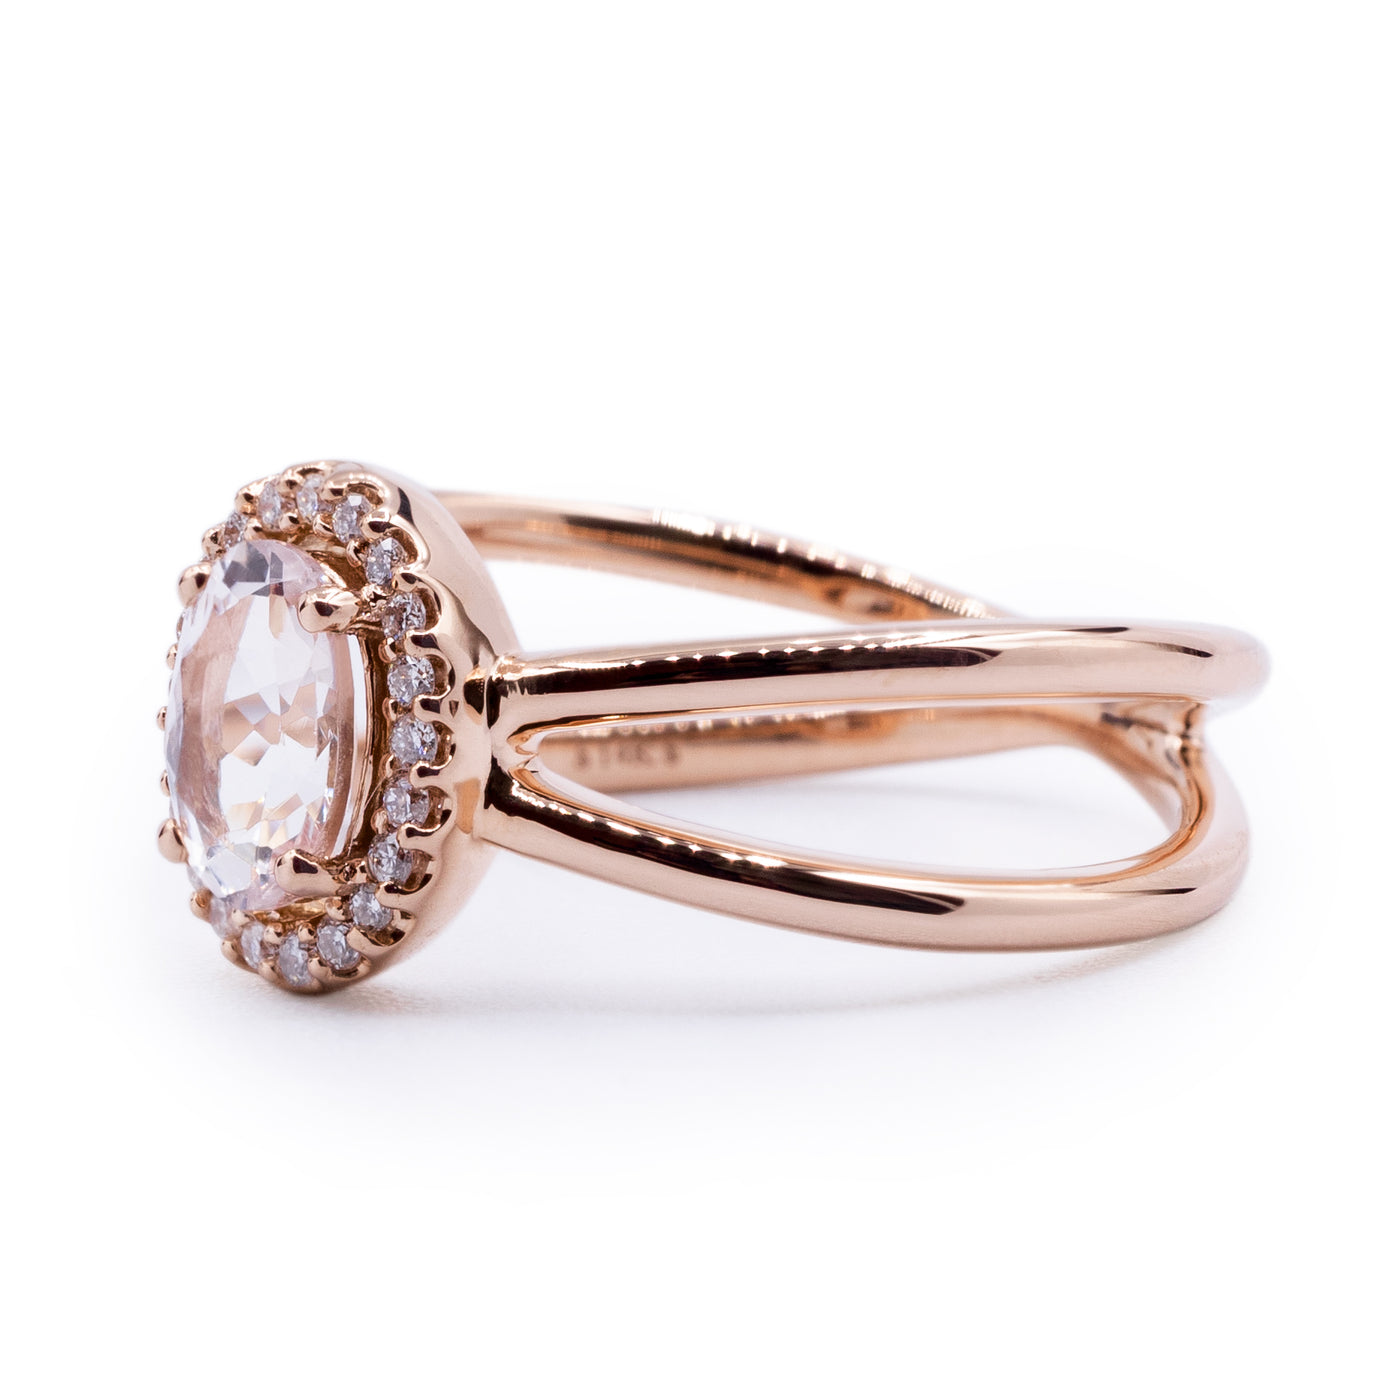 Oval Morganite Setting with Diamond Accented Halo and Criss Cross Ring